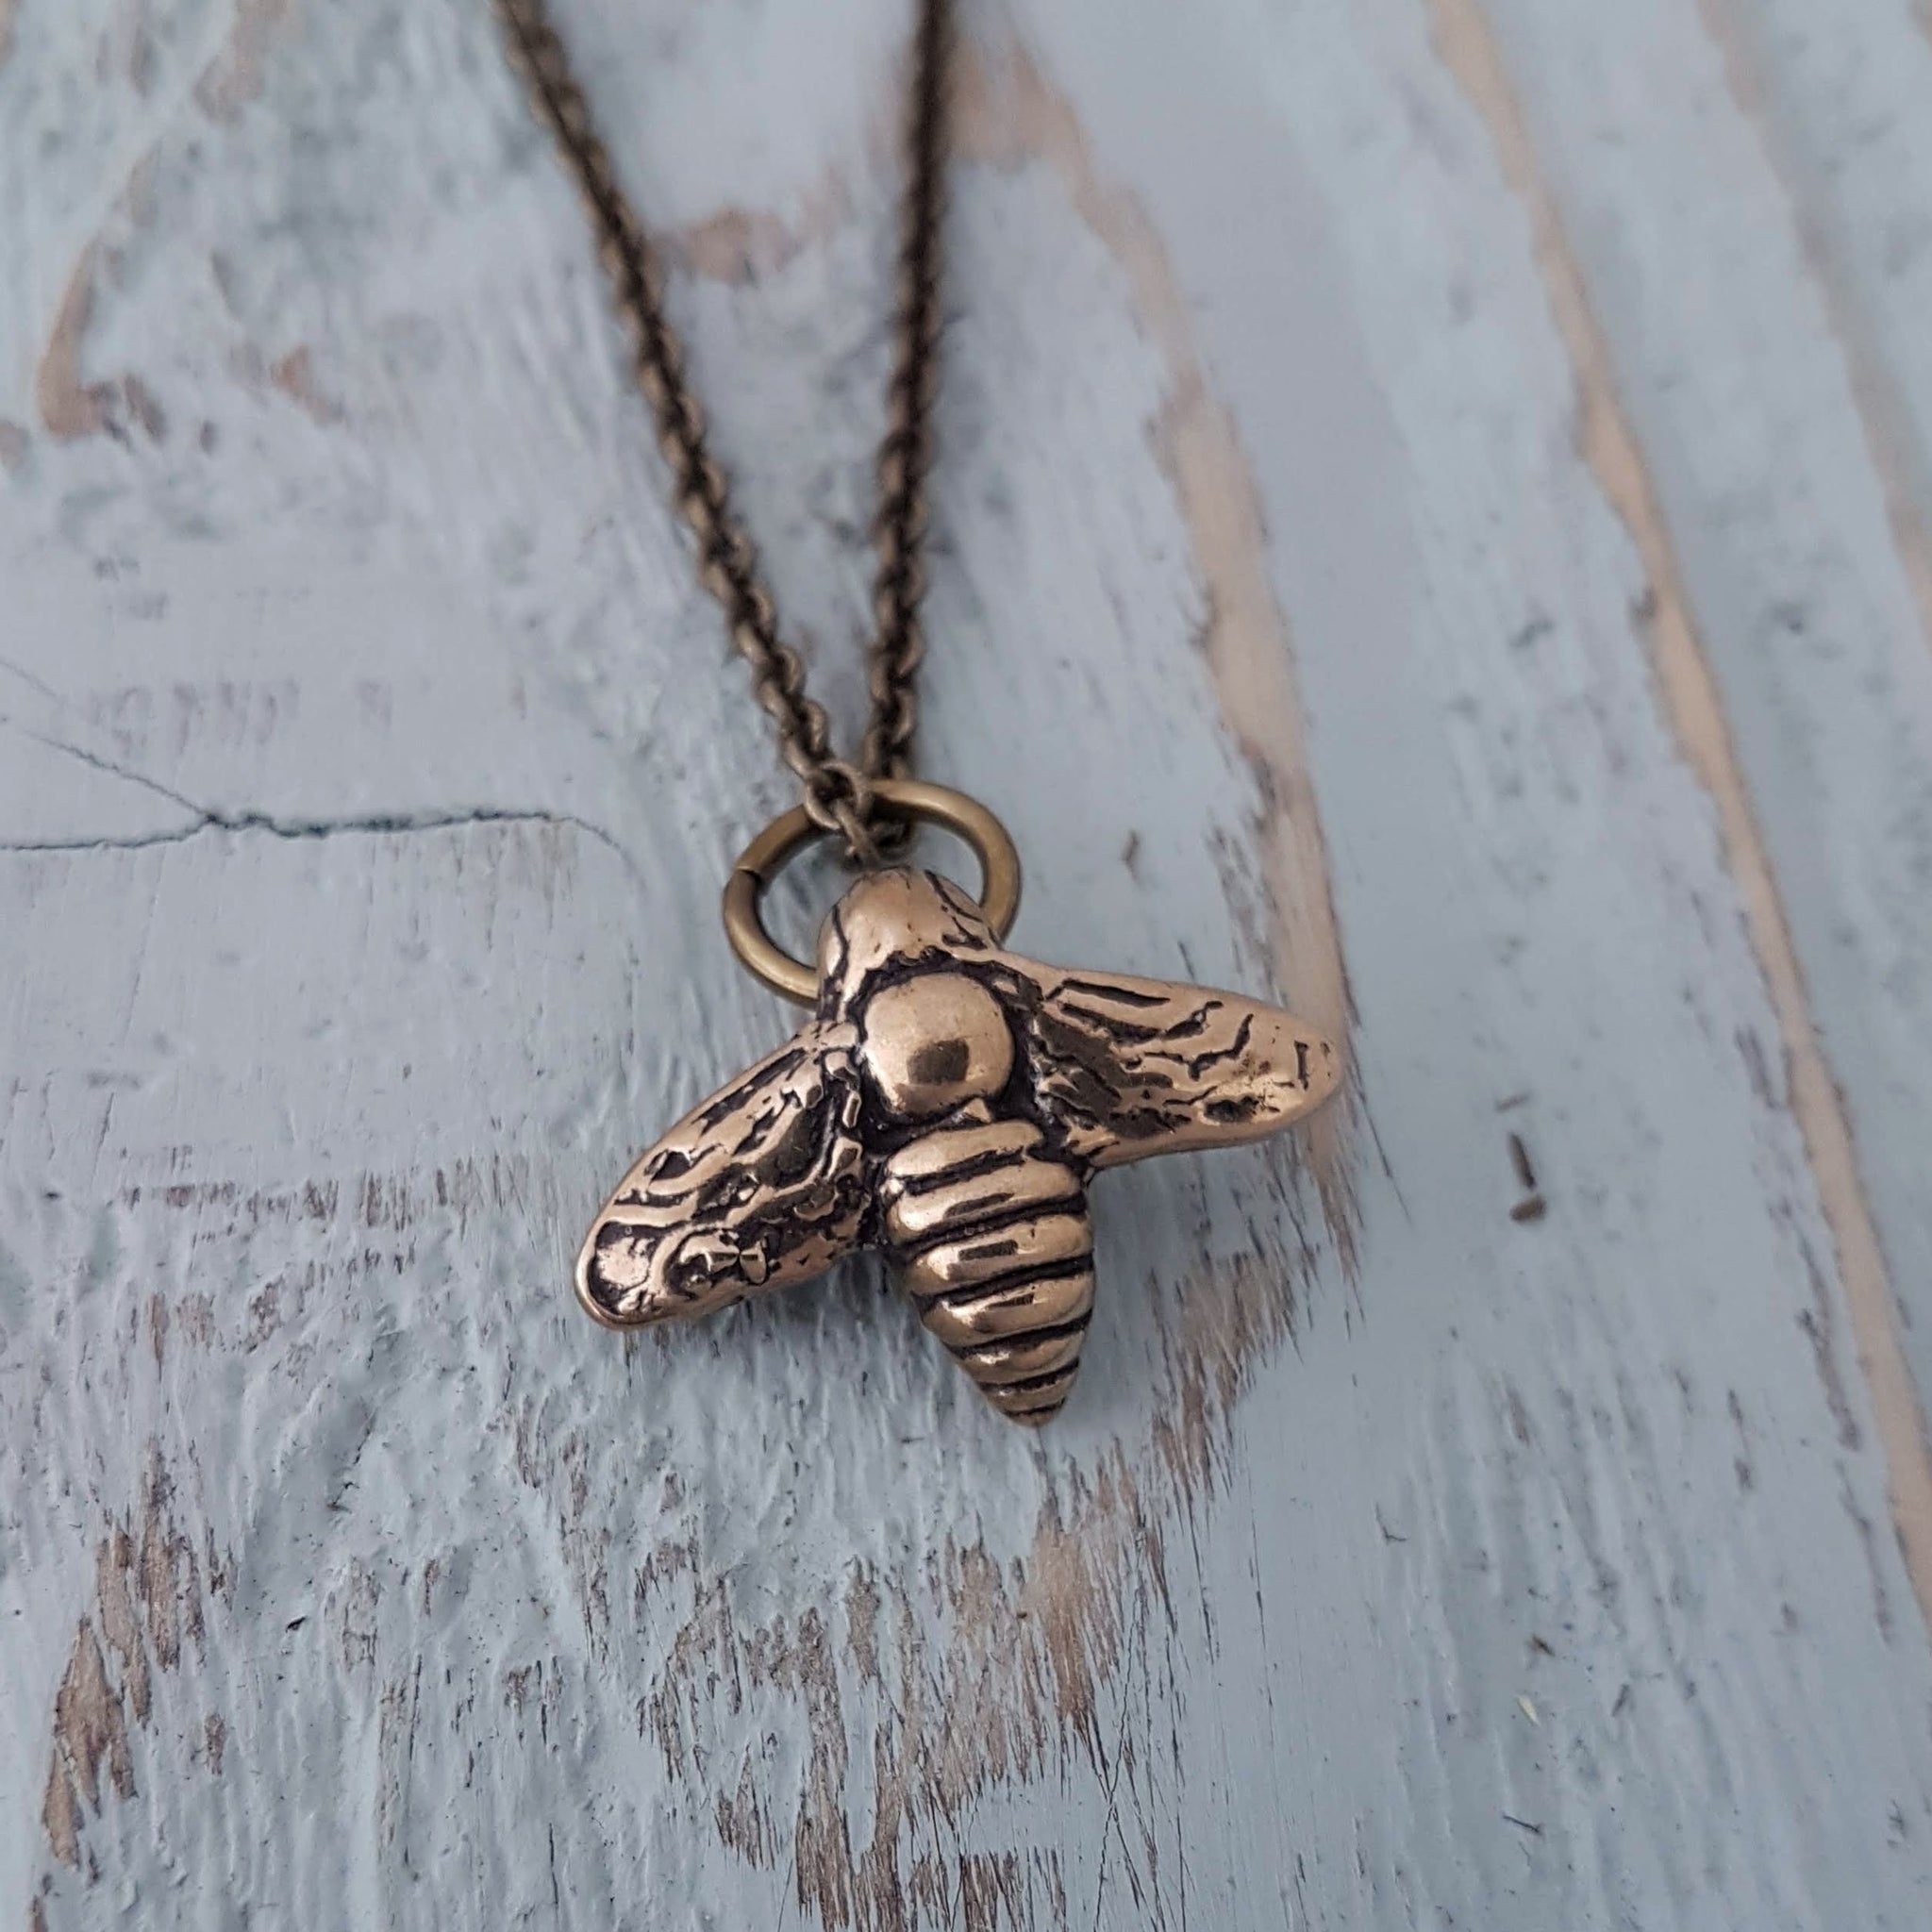 Flying Honey Bumble Bee Charm Necklace - Gwen Delicious Jewelry Designs